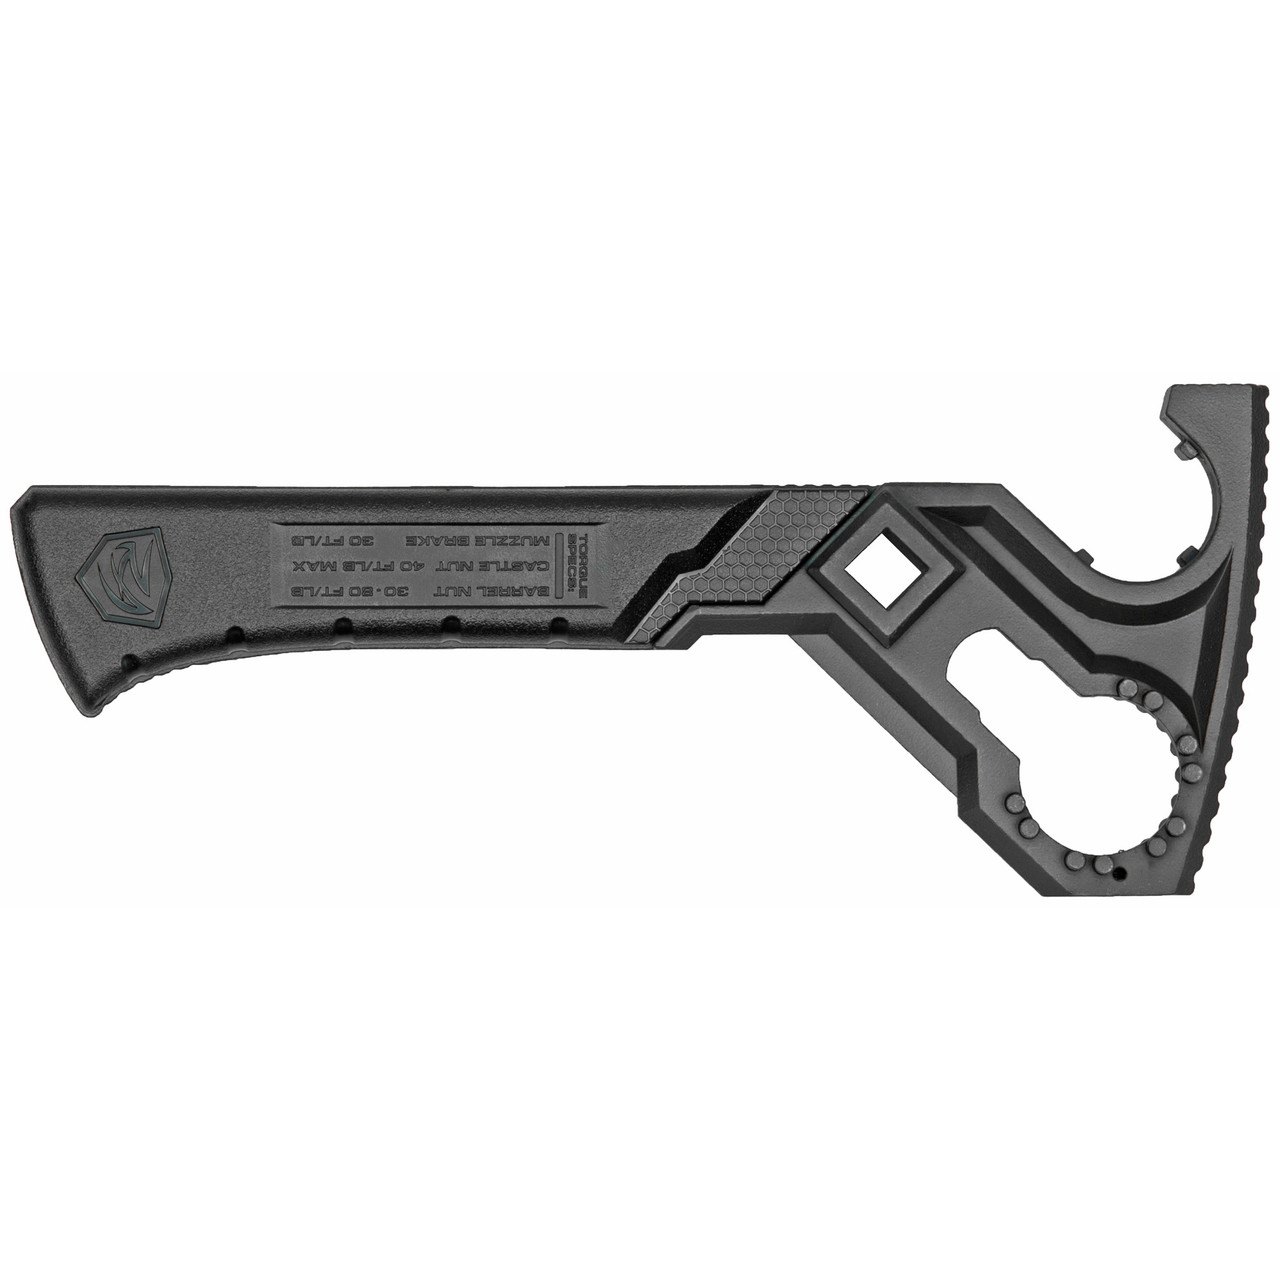 Real Avid ARMORER’S MASTER WRENCH®